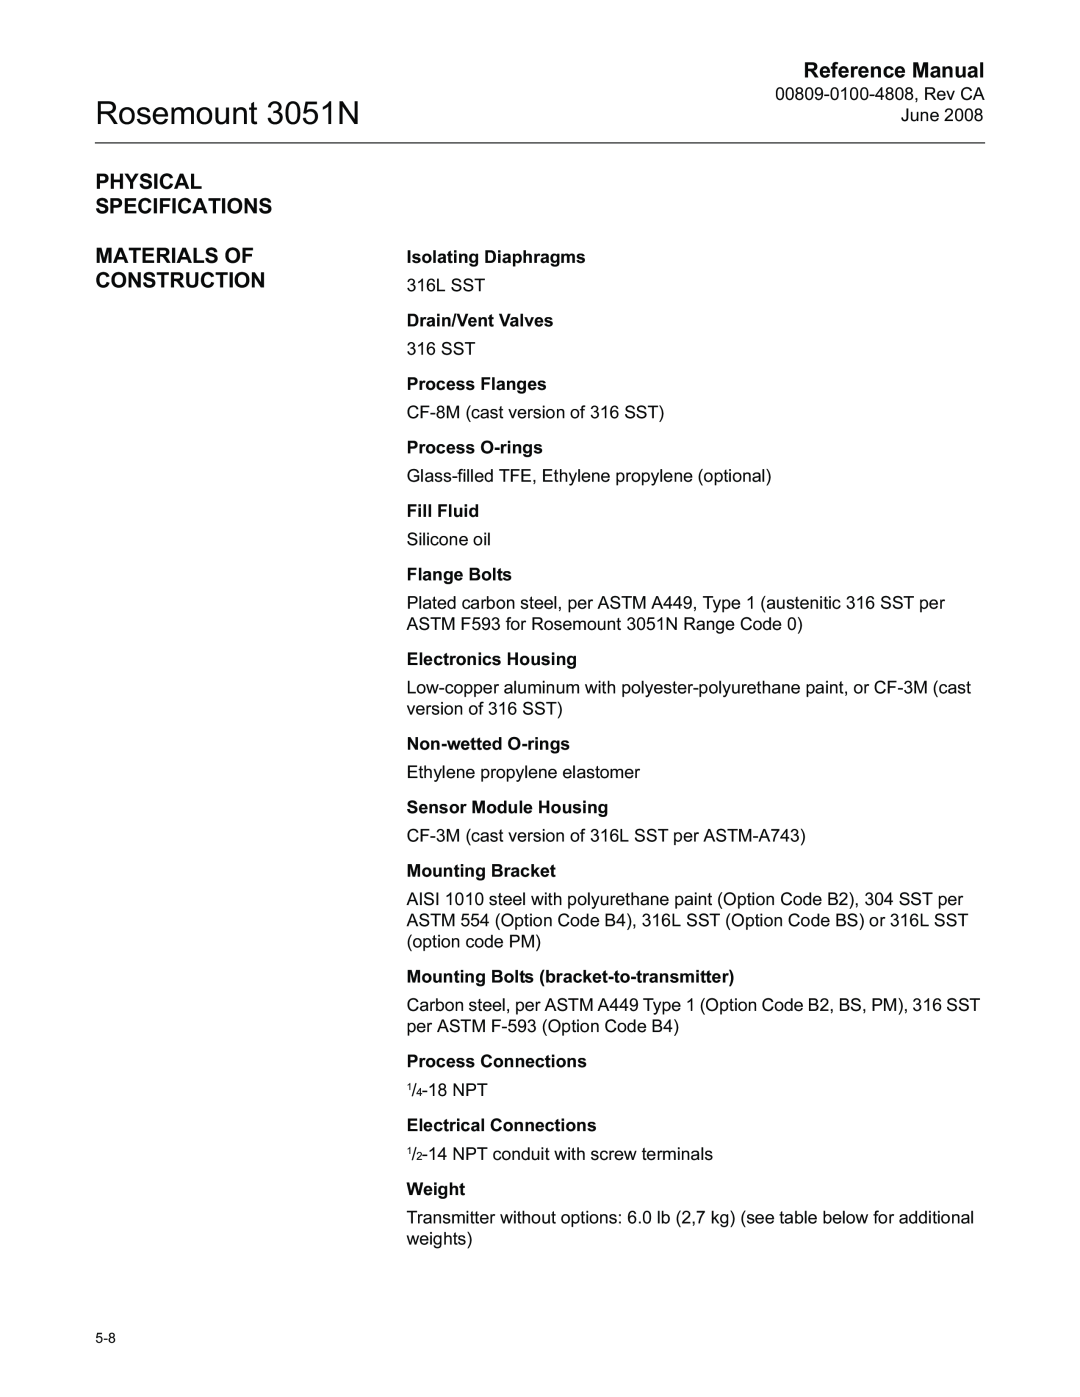 Emerson manual Physical Specifications Materials Of Construction, Rosemount 3051N, Reference Manual 